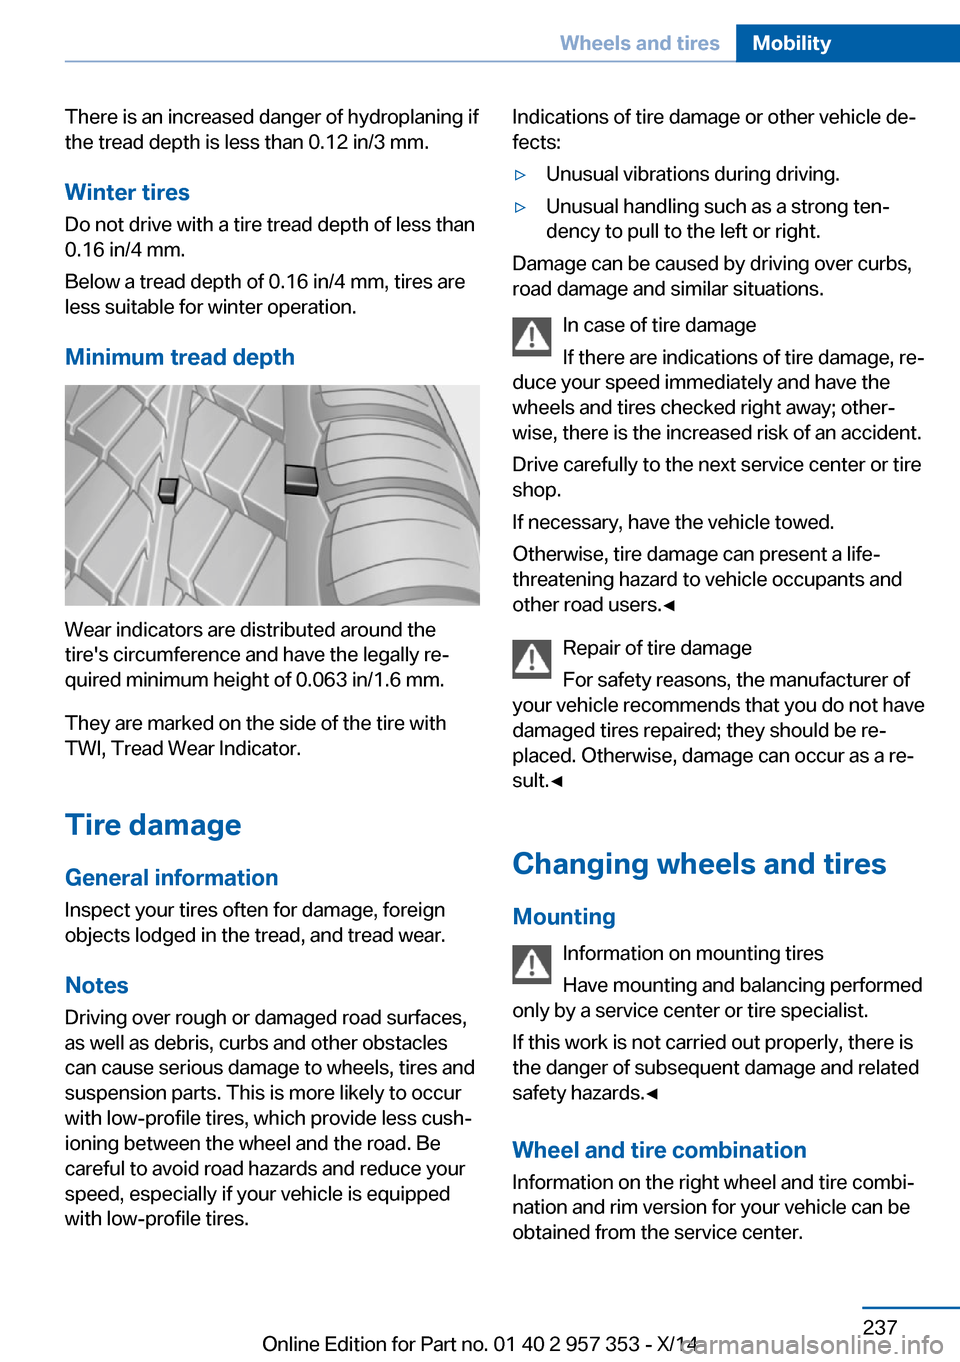 BMW X1 2014 E84 Owners Manual There is an increased danger of hydroplaning if
the tread depth is less than 0.12 in/3 mm.
Winter tires Do not drive with a tire tread depth of less than
0.16 in/4 mm.
Below a tread depth of 0.16 in/4